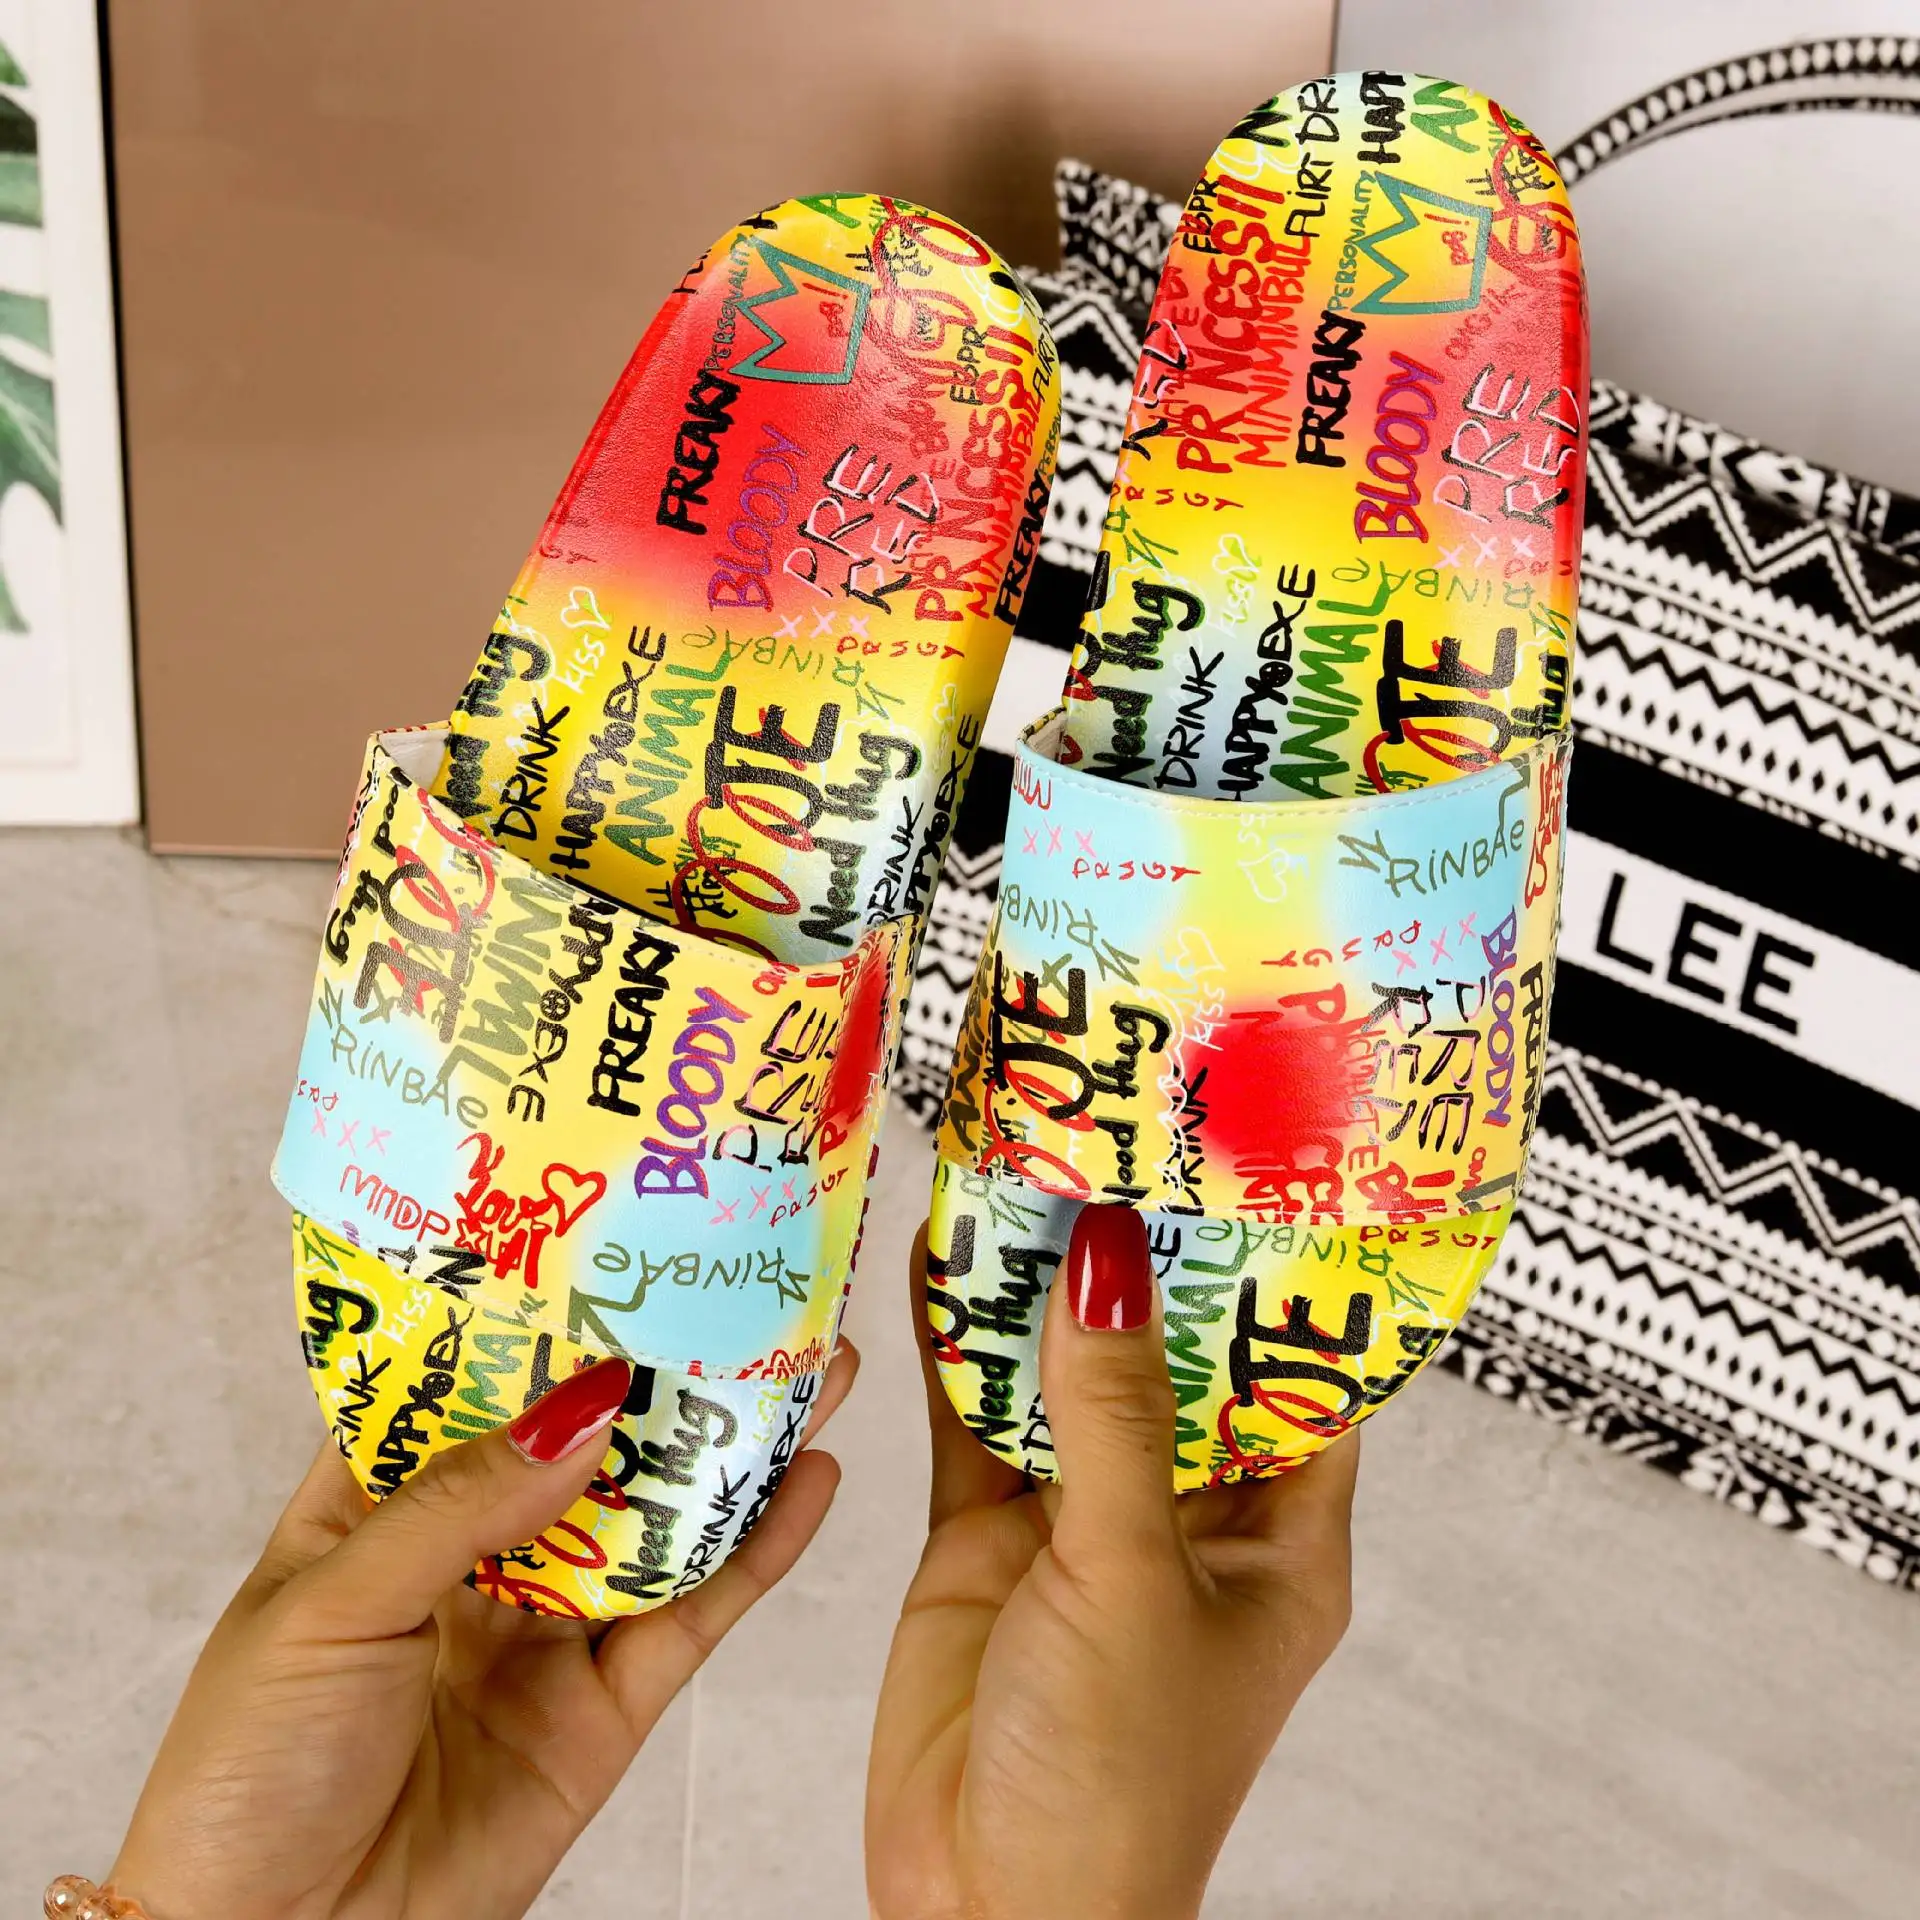 

2021 New Summer Candy Platform Sandals For Women And Ladies Lining Material Flat Sandals Designer Shoes Flat Shoes Women, Black colour